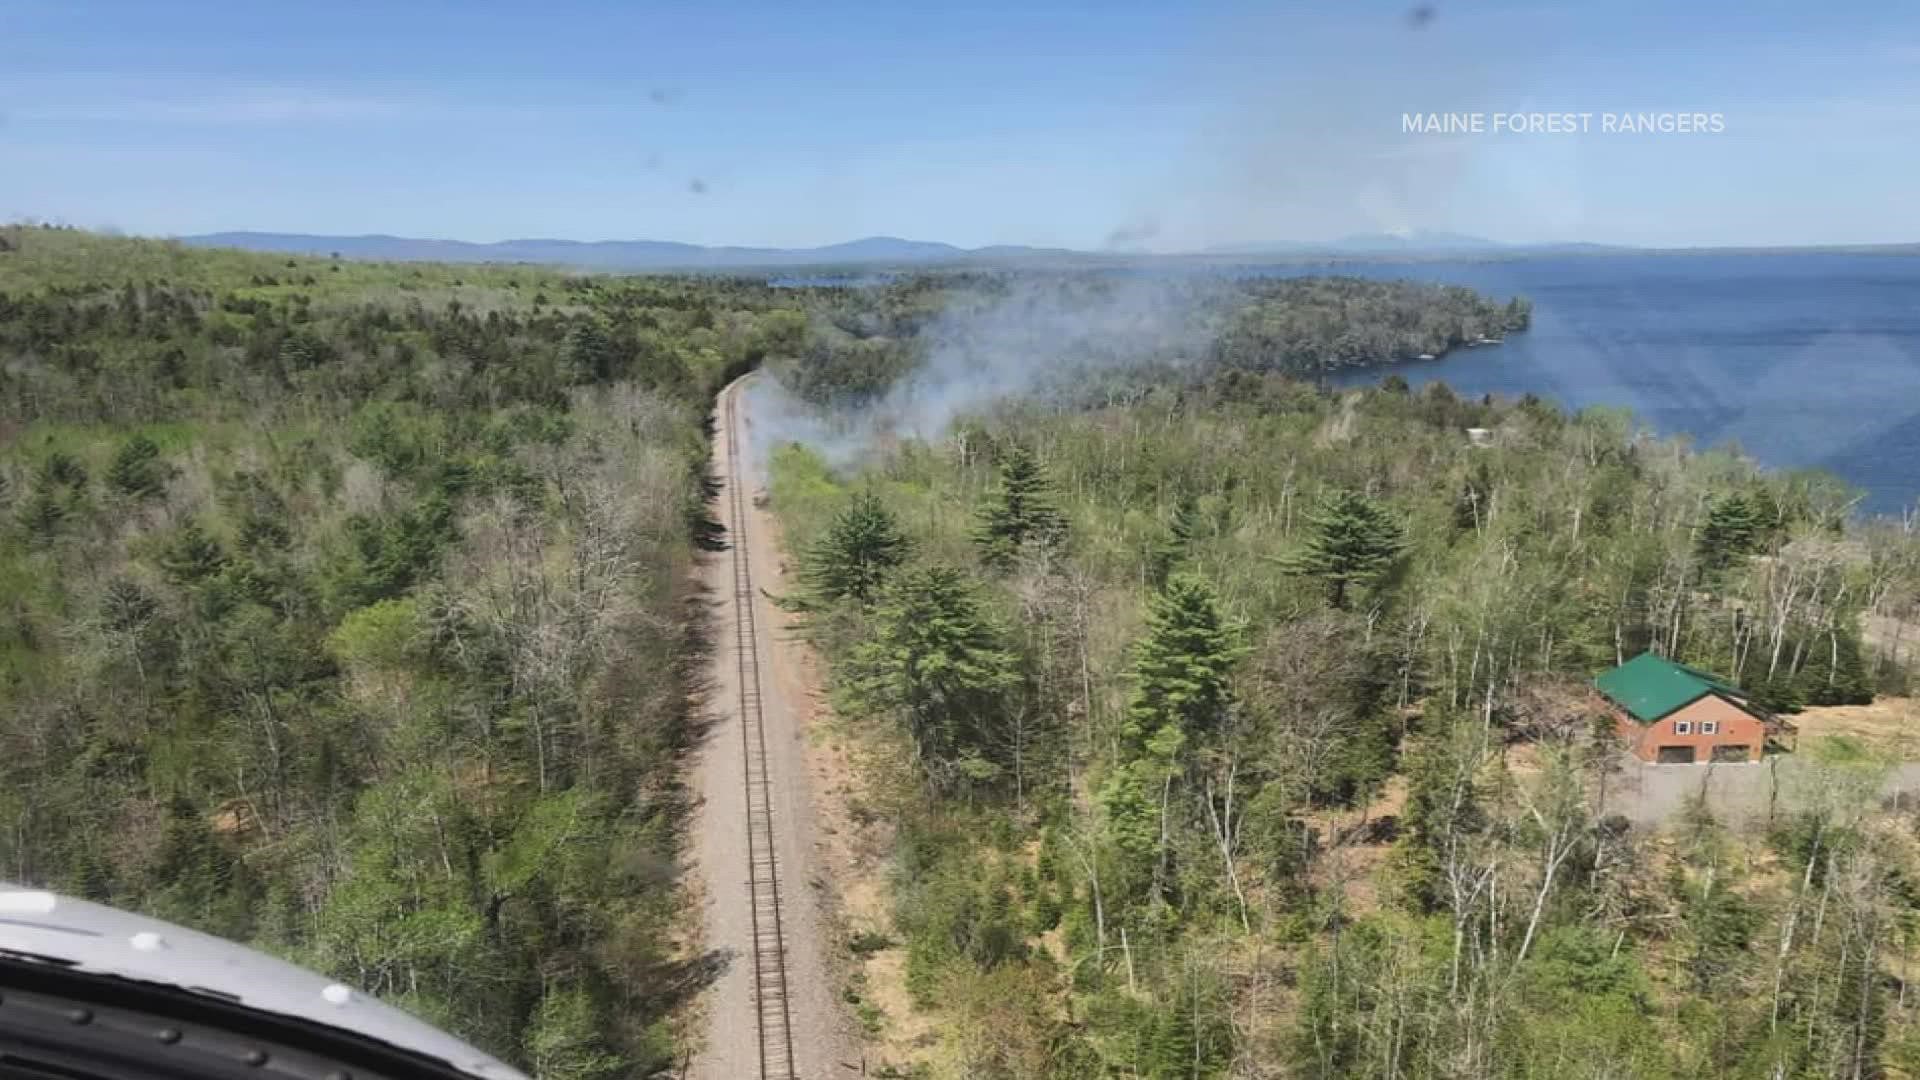 Fires along railroad tracks in Lake View and Knights Landing Friday afternoon drew firefighters from multiple departments, as well as the Maine Forest Service.